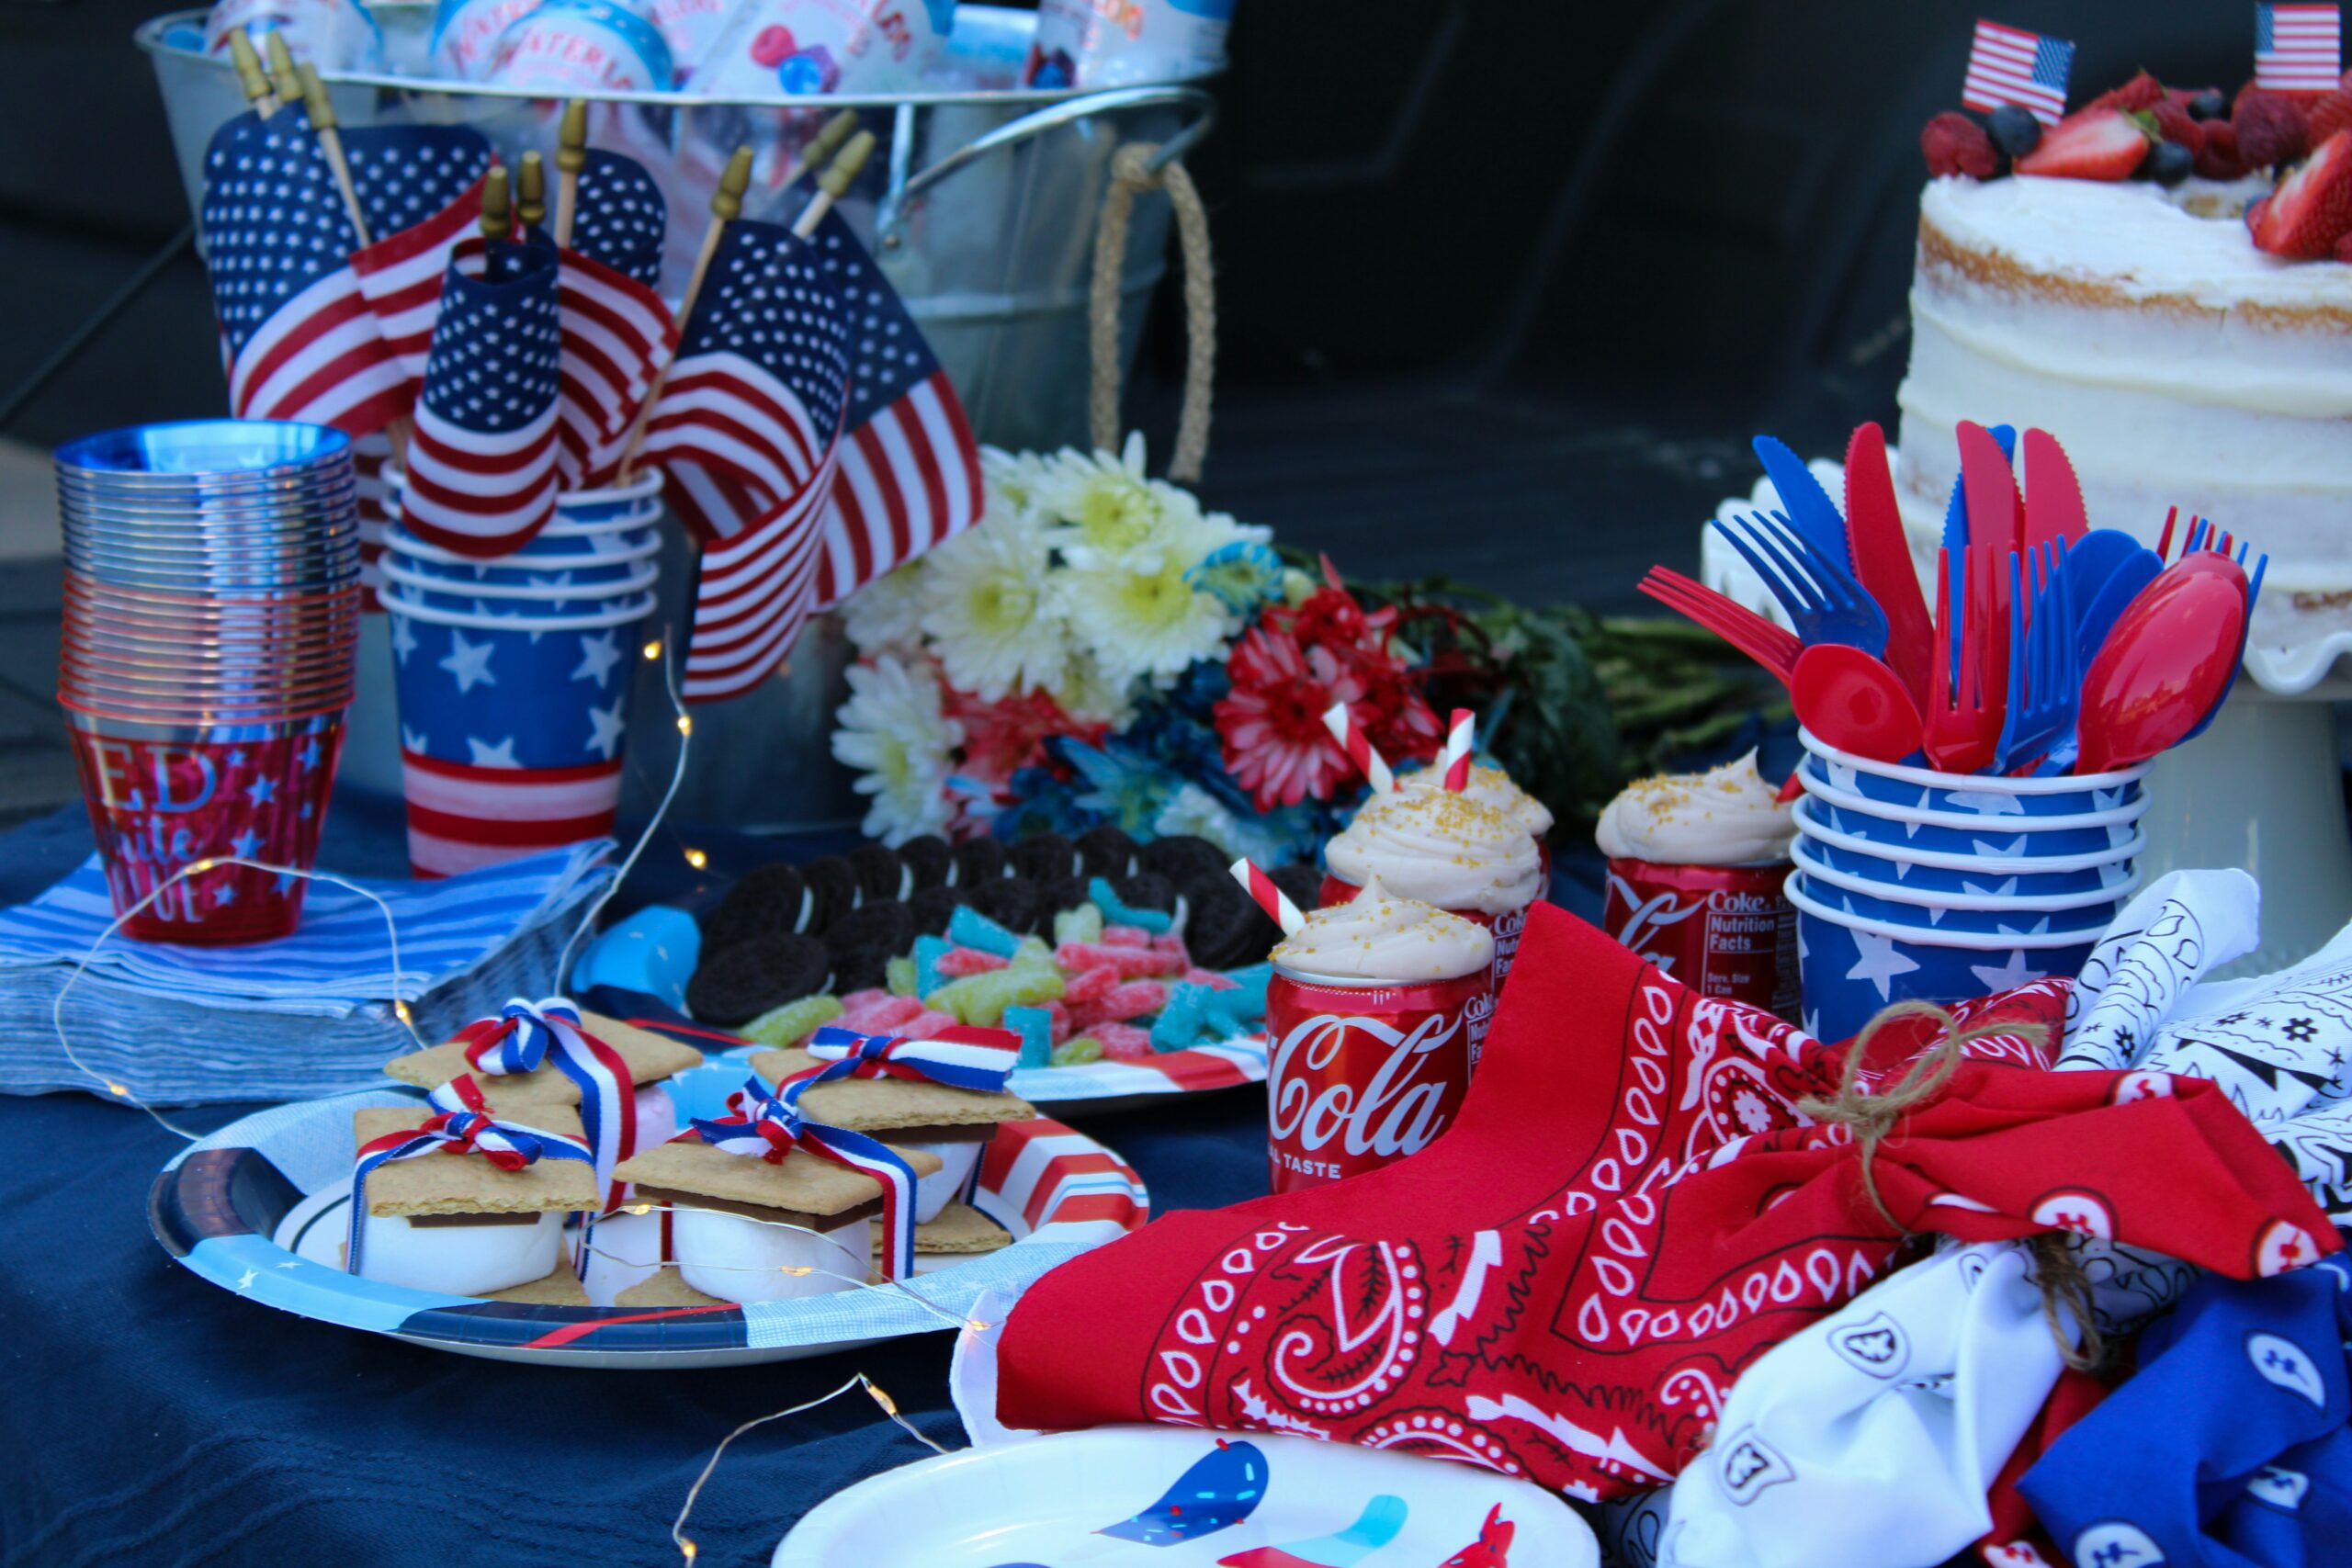 USA party decorations